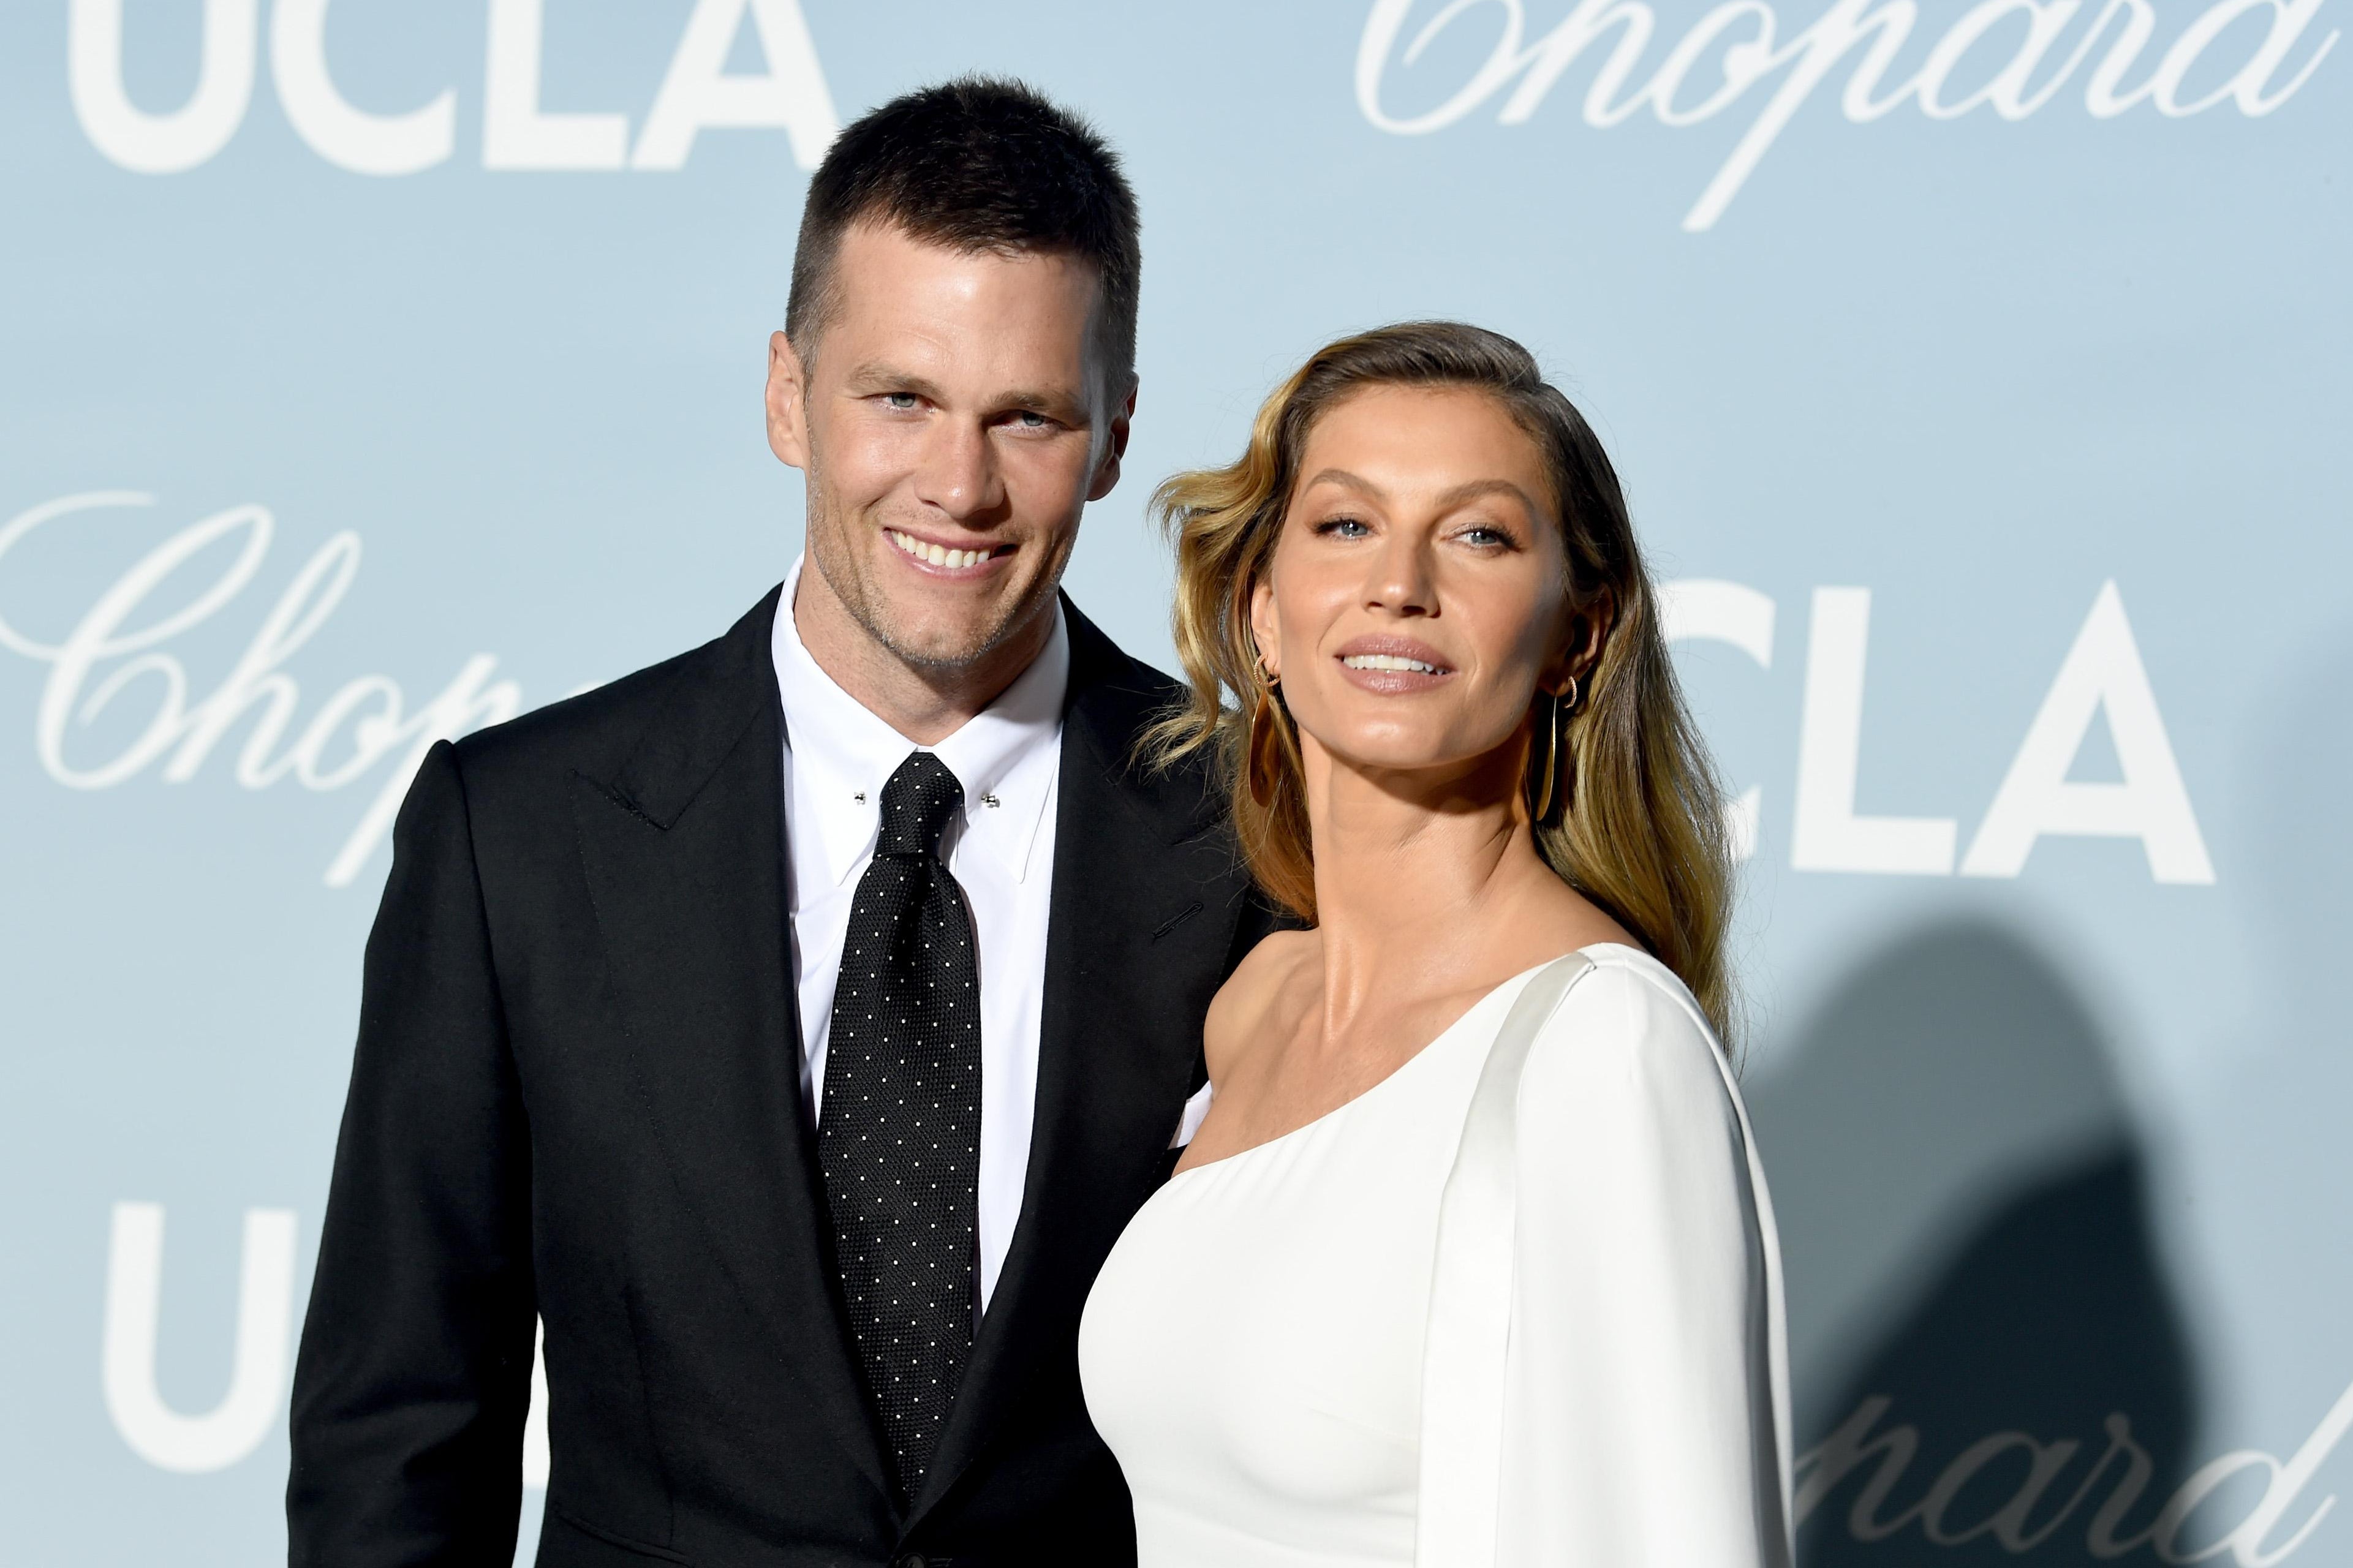 LOS ANGELES, CALIFORNIA - FEBRUARY 21: (L-R) Tom Brady and Gisele Bündchen attends the 2019 Hollywood For Science Gala at Private Residence on February 21, 2019 in Los Angeles, California. (Photo by Kevin Winter/Getty Images)